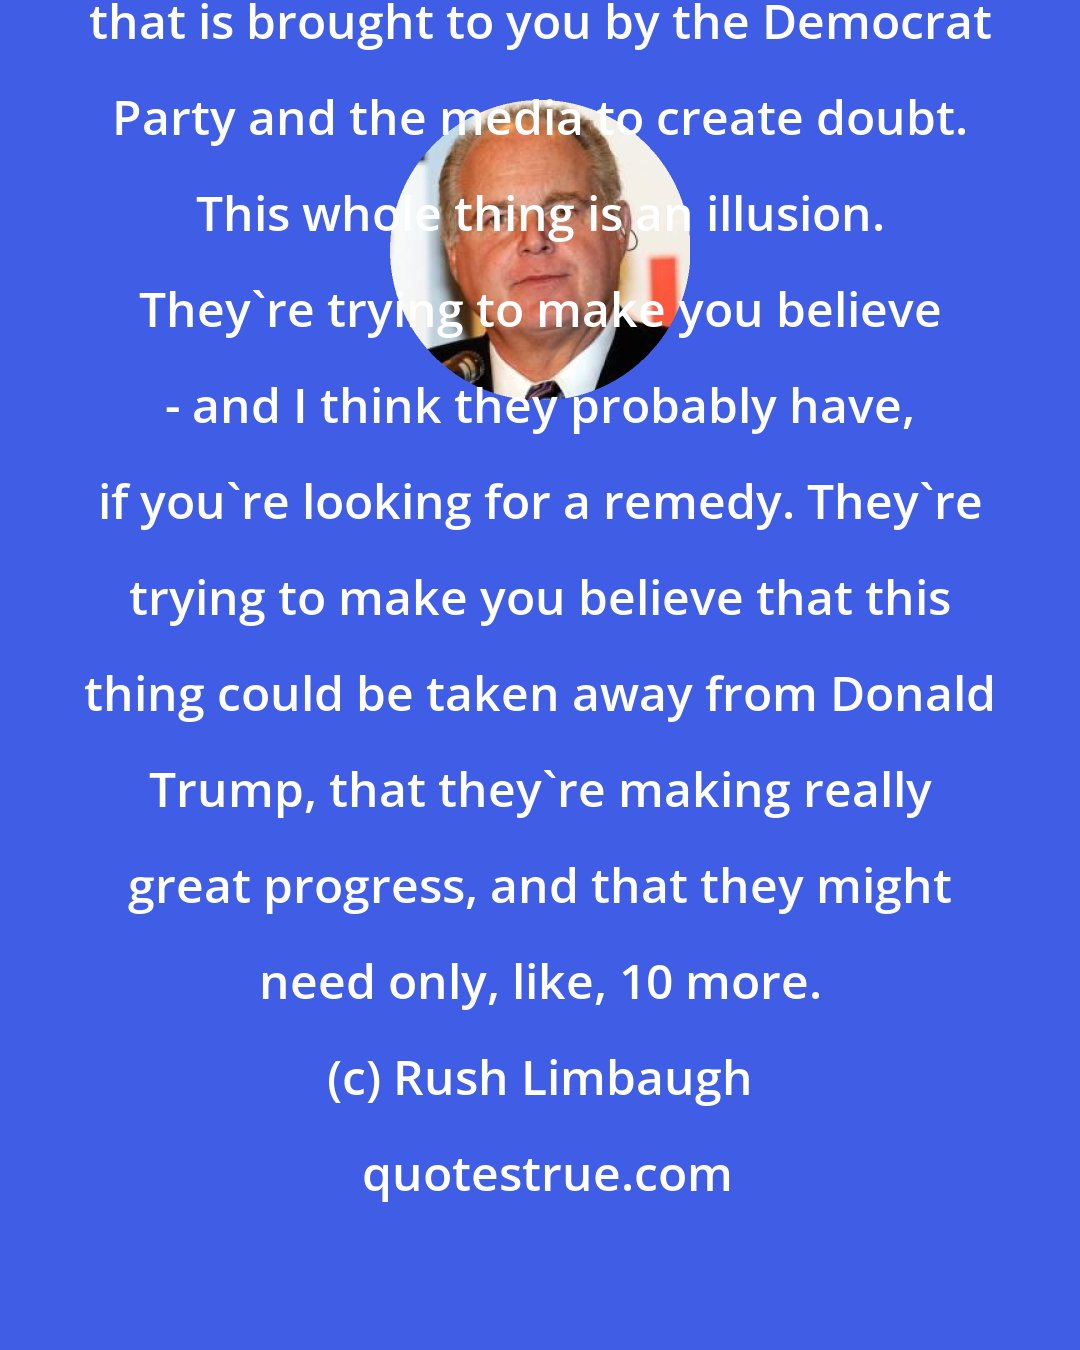 Rush Limbaugh: This is part of the ongoing campaign that is brought to you by the Democrat Party and the media to create doubt. This whole thing is an illusion. They're trying to make you believe - and I think they probably have, if you're looking for a remedy. They're trying to make you believe that this thing could be taken away from Donald Trump, that they're making really great progress, and that they might need only, like, 10 more.